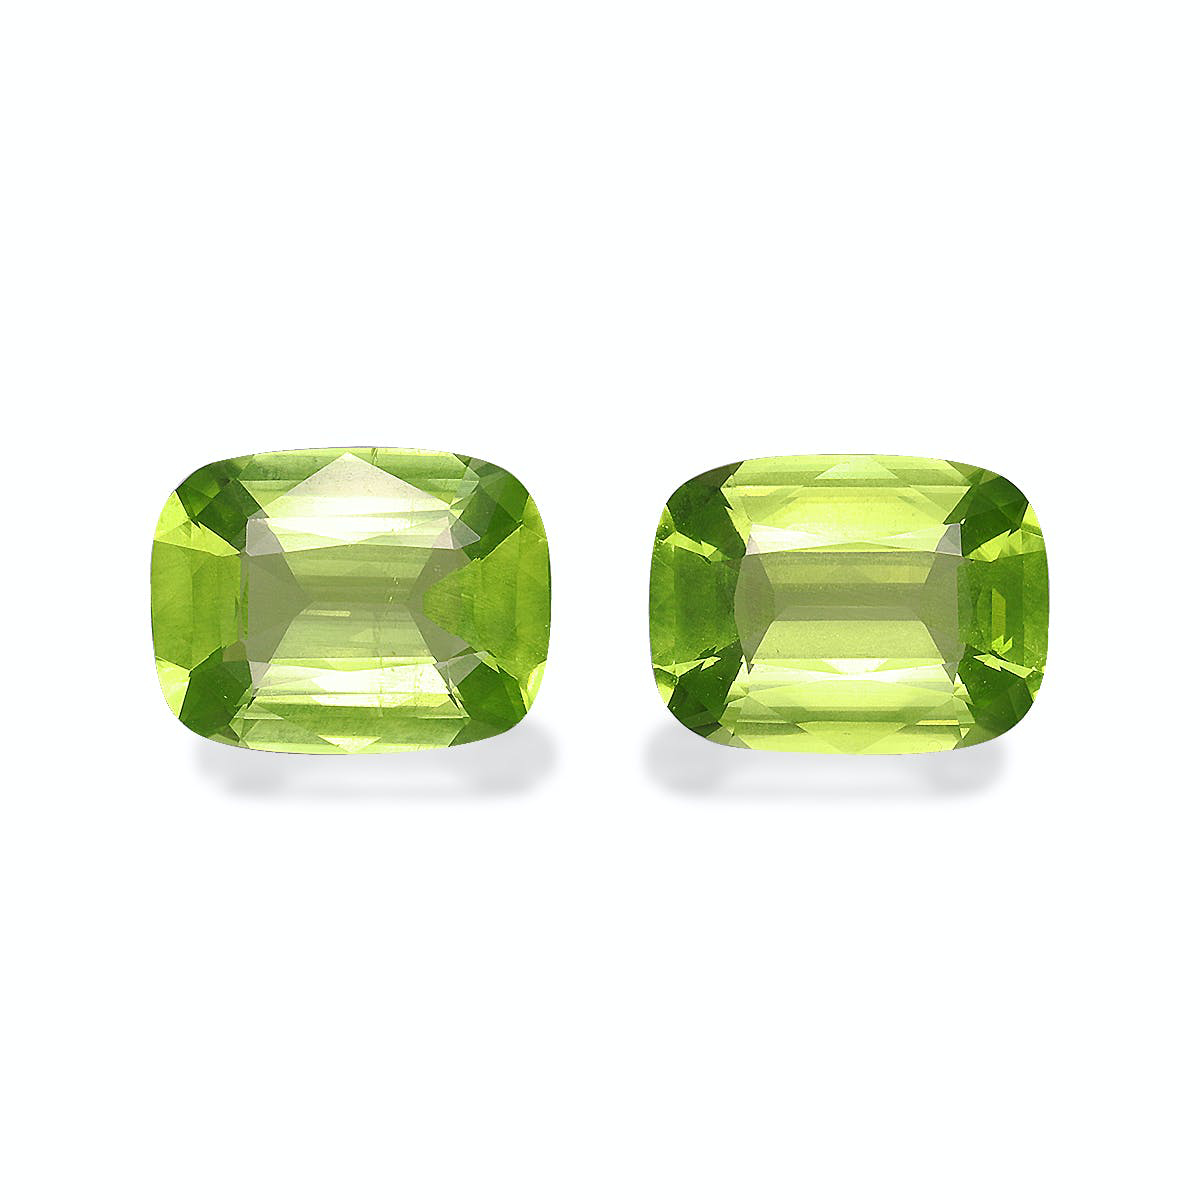 Picture of Lime Green Peridot 6.12ct - 10x8mm Pair (PD0142)